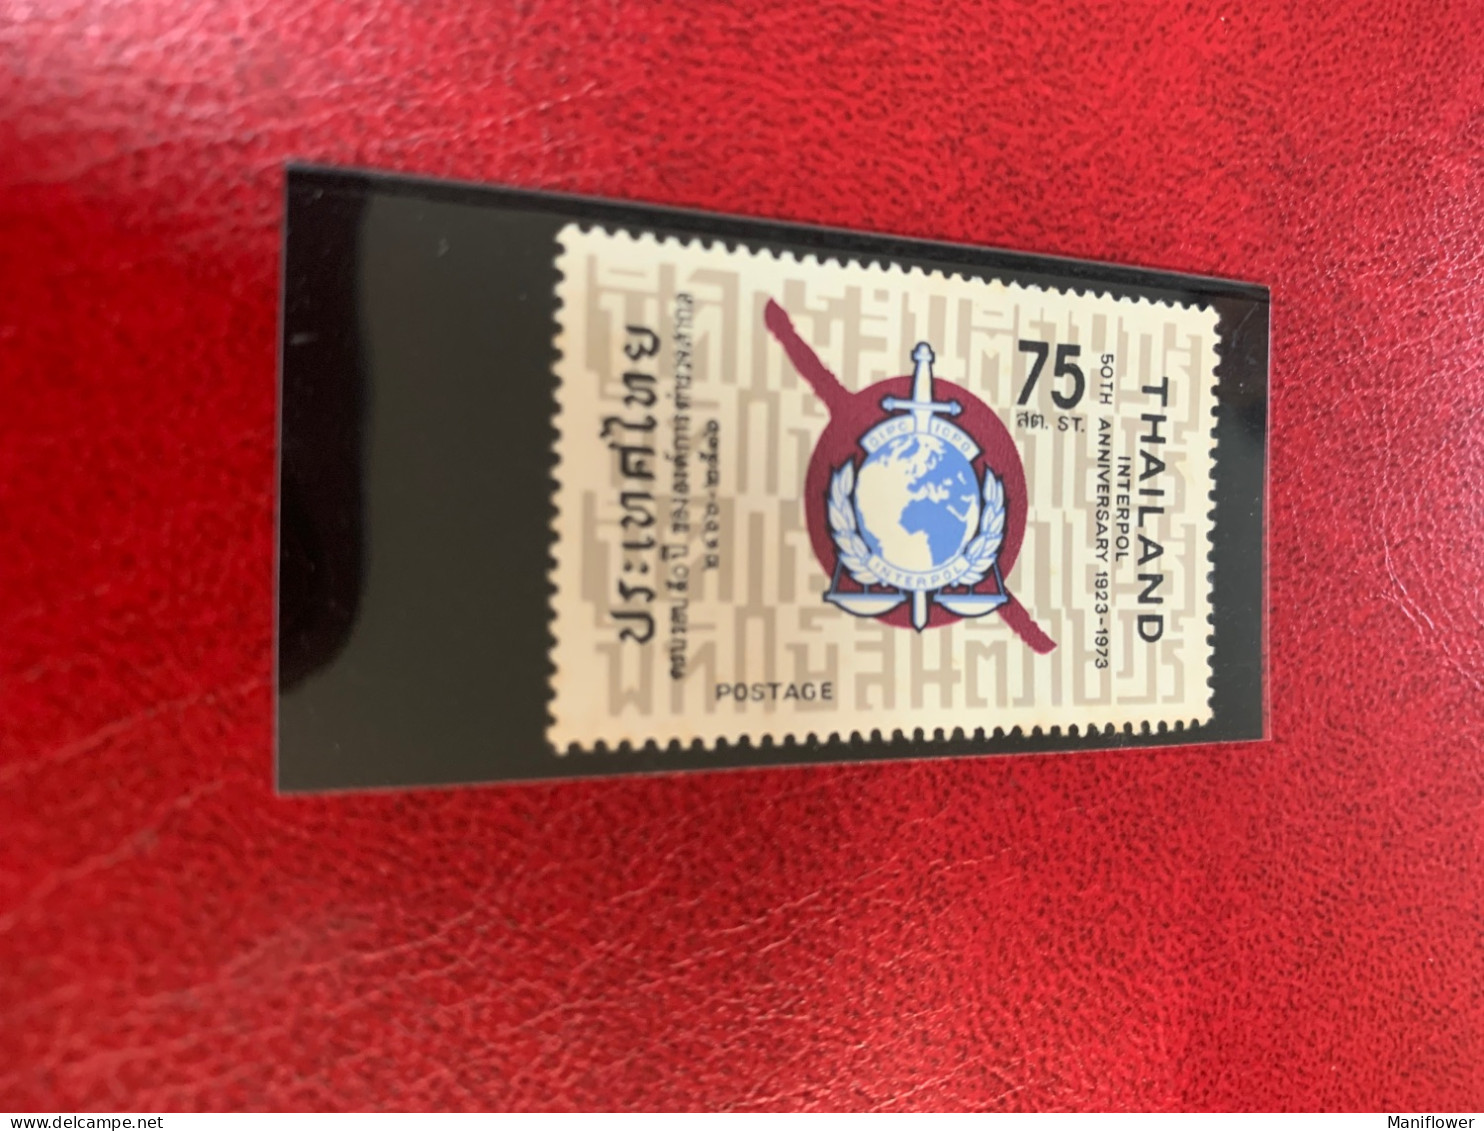 Thailand Stamp MNH 1973 Police Interpol - Cycling